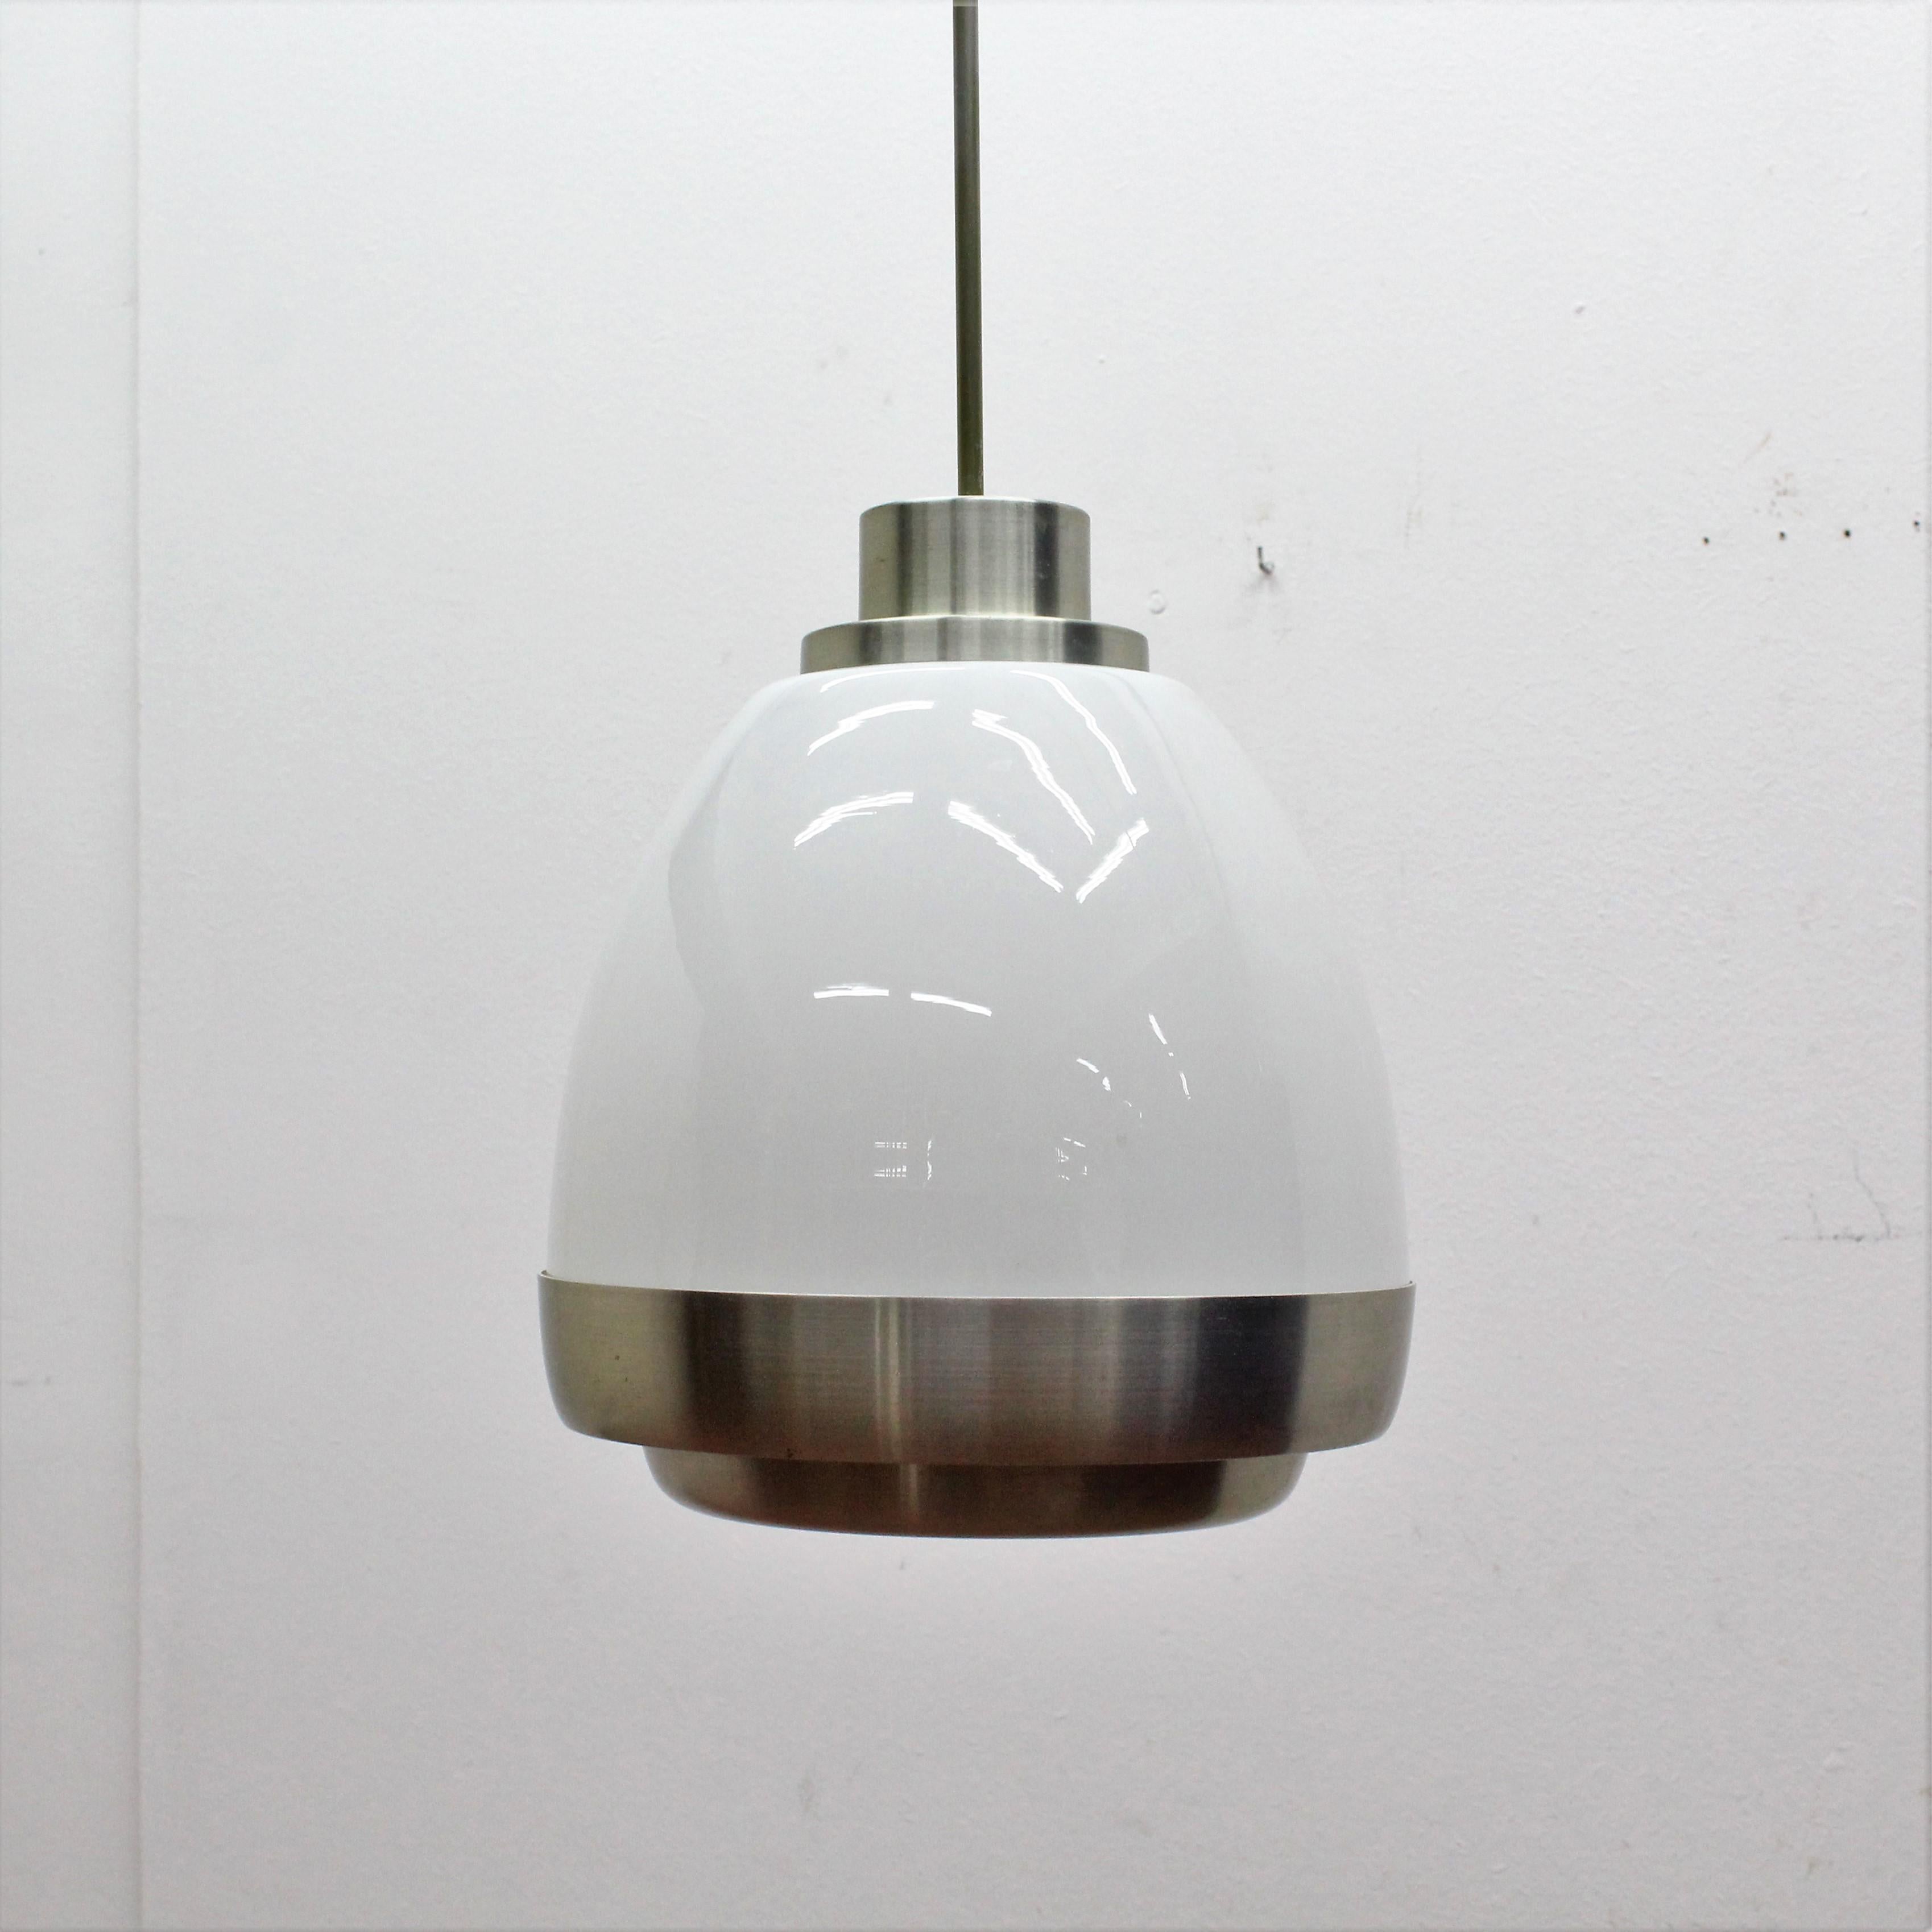 Italian Midcentury Pendant Glass and Metal Lamp by Pia Guidetti Crippa for Lumi, 1960s